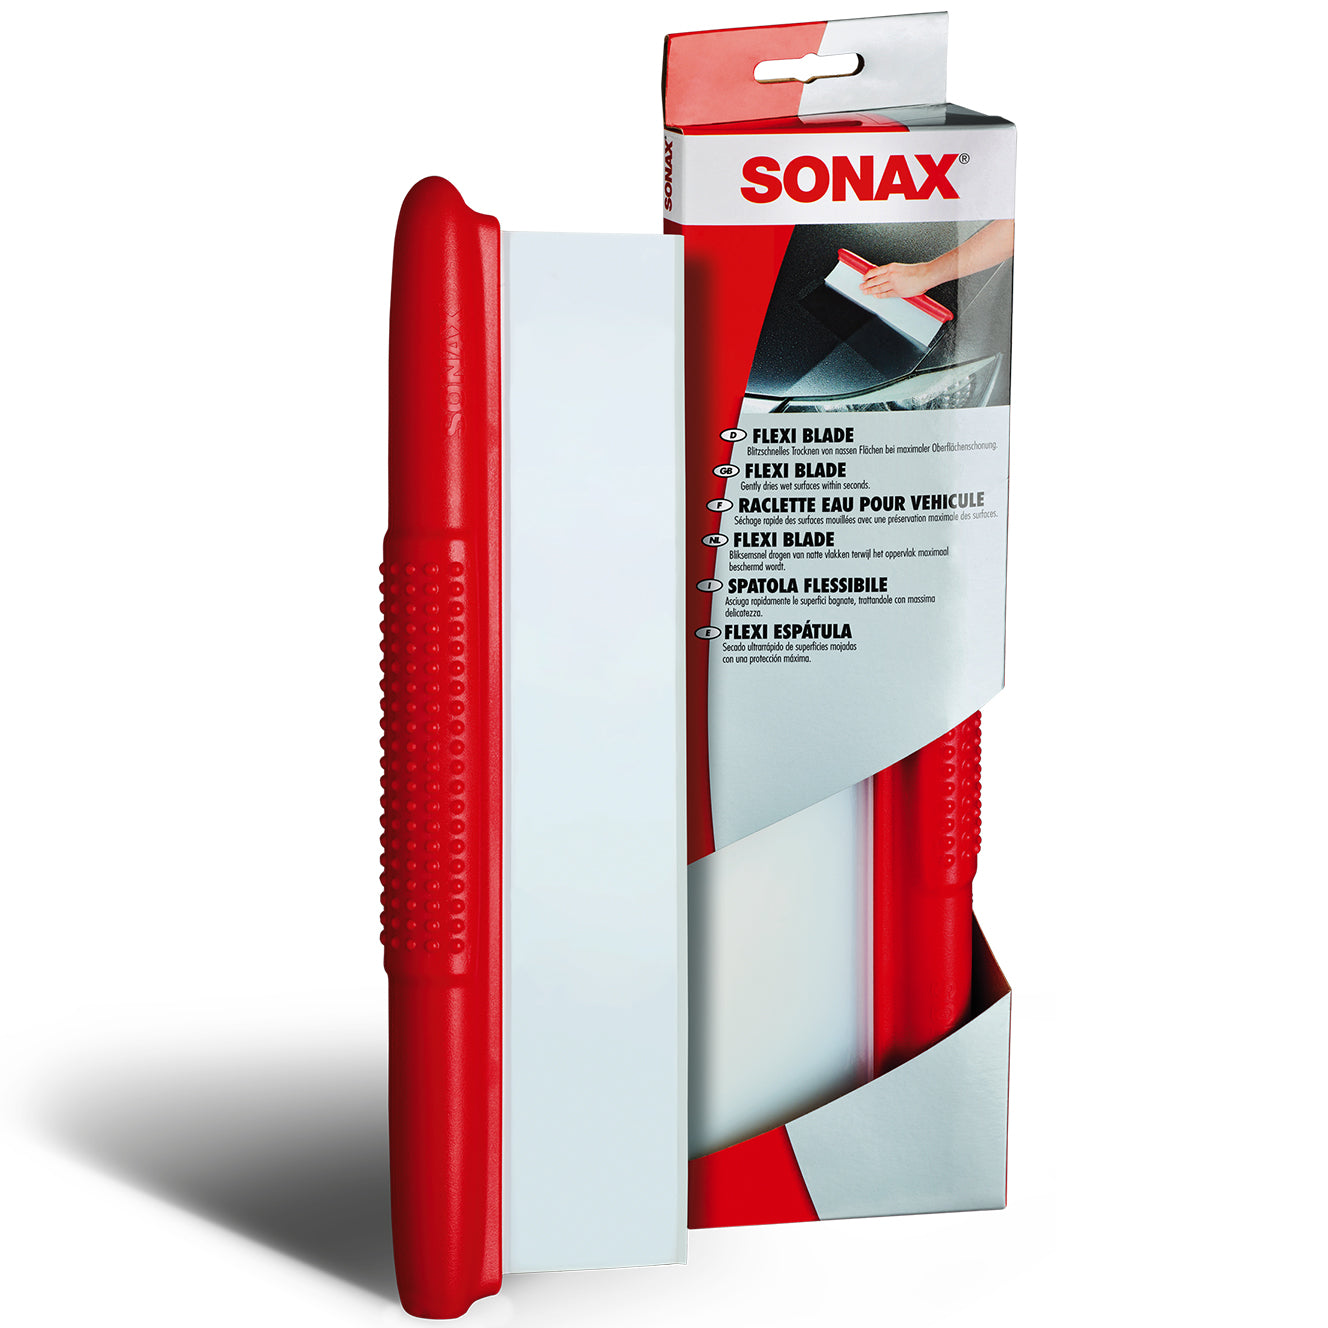 SONAX Flexi Blade for Fast Drying